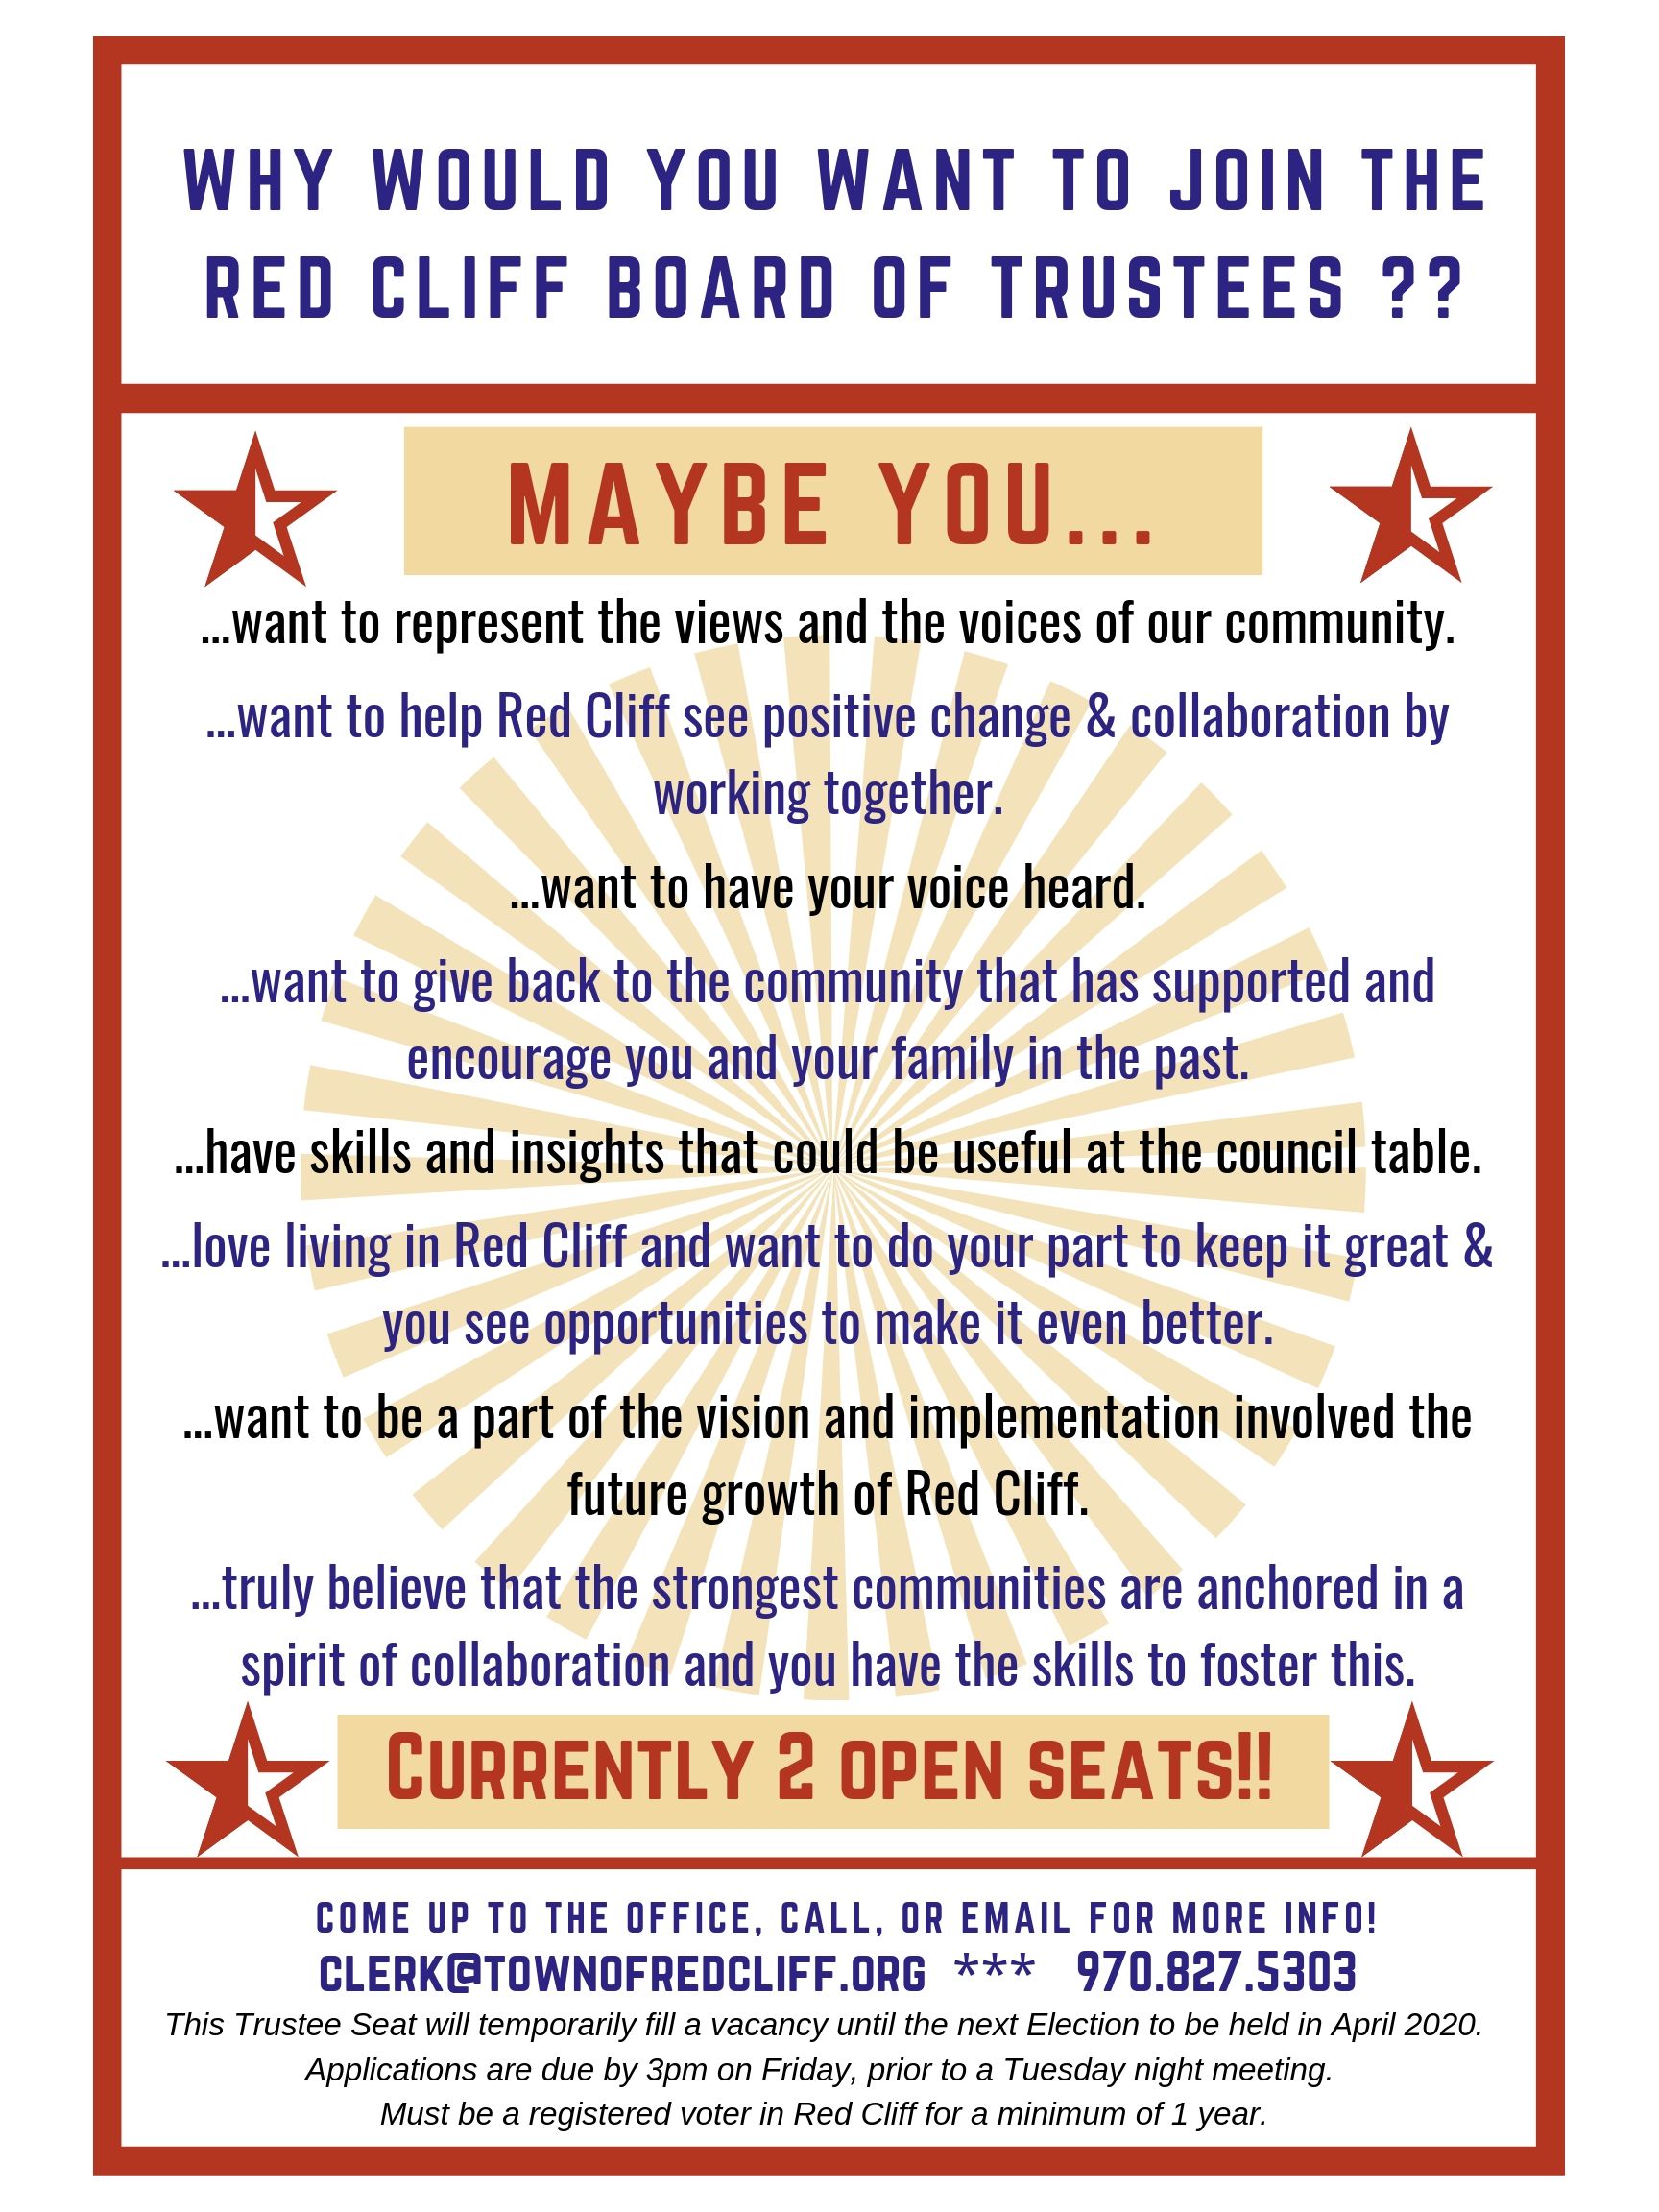 Posting for why you would want to join the board of trustees